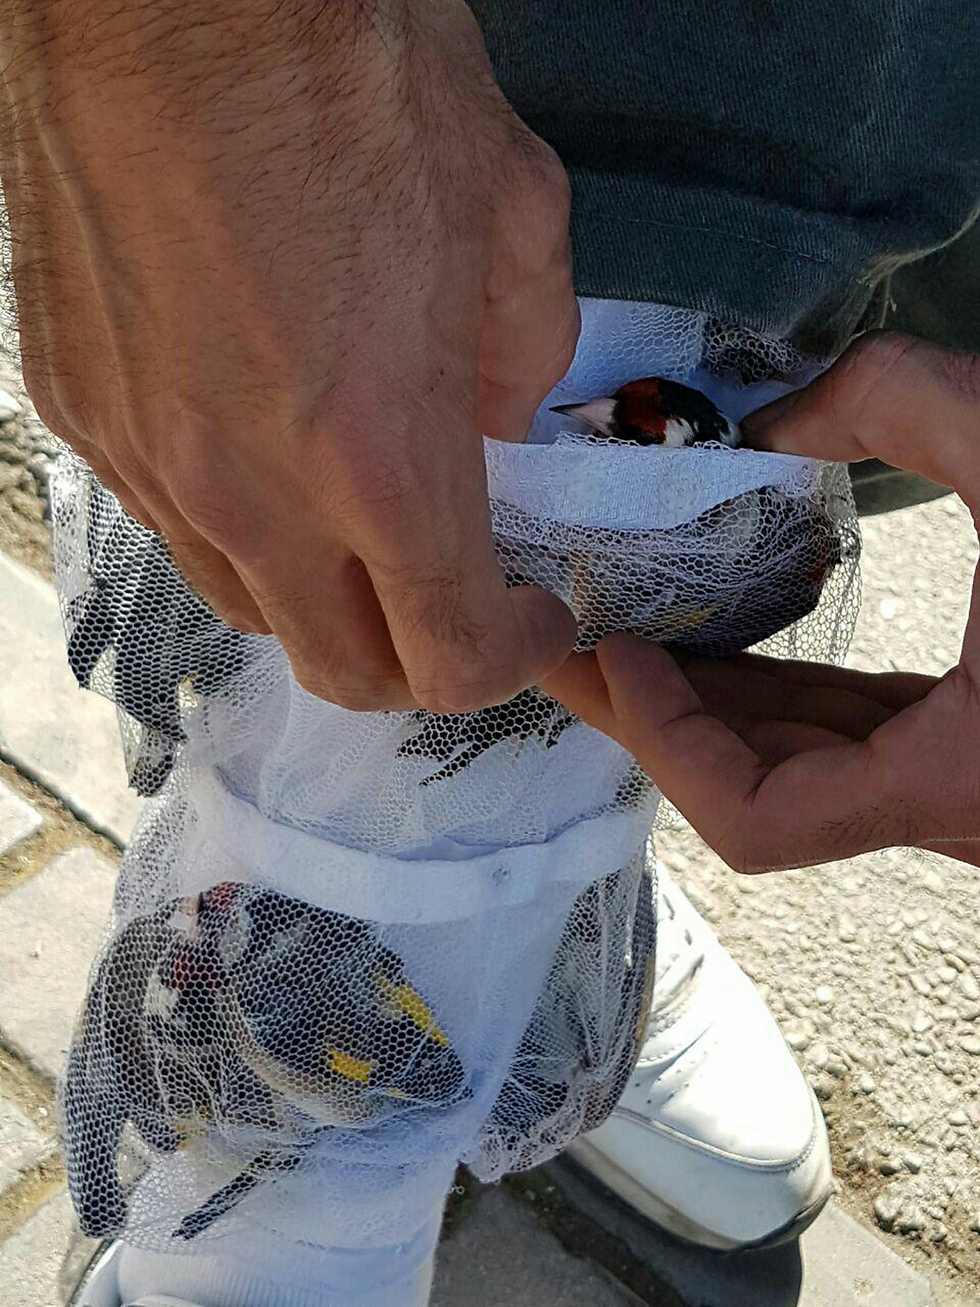 The Palestinian smuggled the birds in his pants (Photo: Israel Ports Authority)